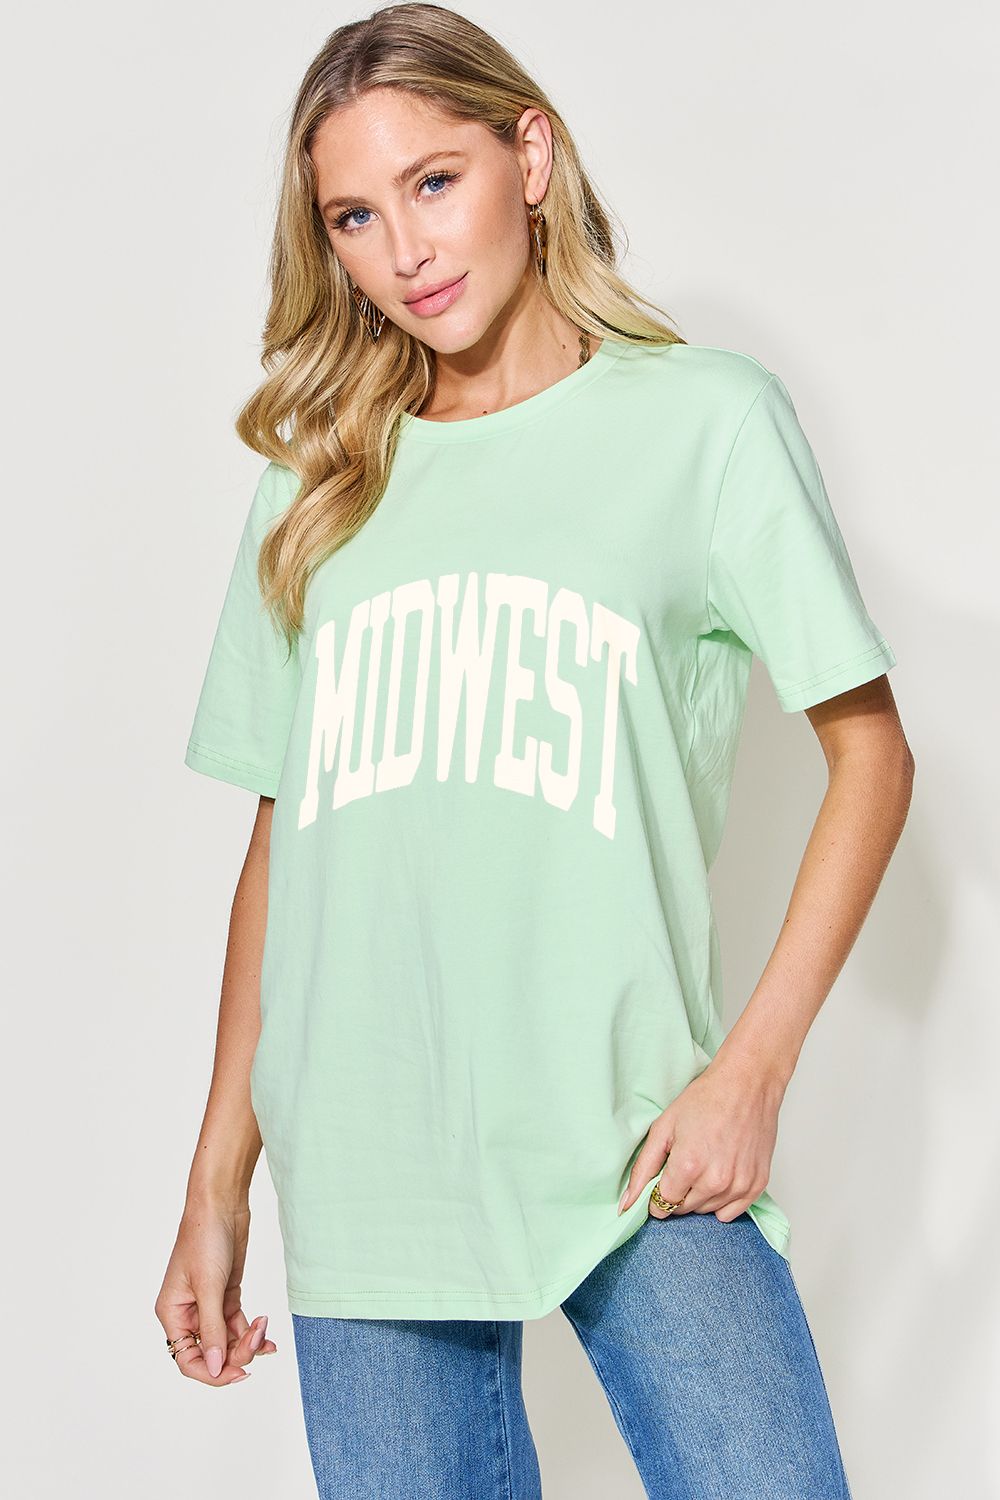 Full Size MIDWEST Graphic Round Neck T-Shirt